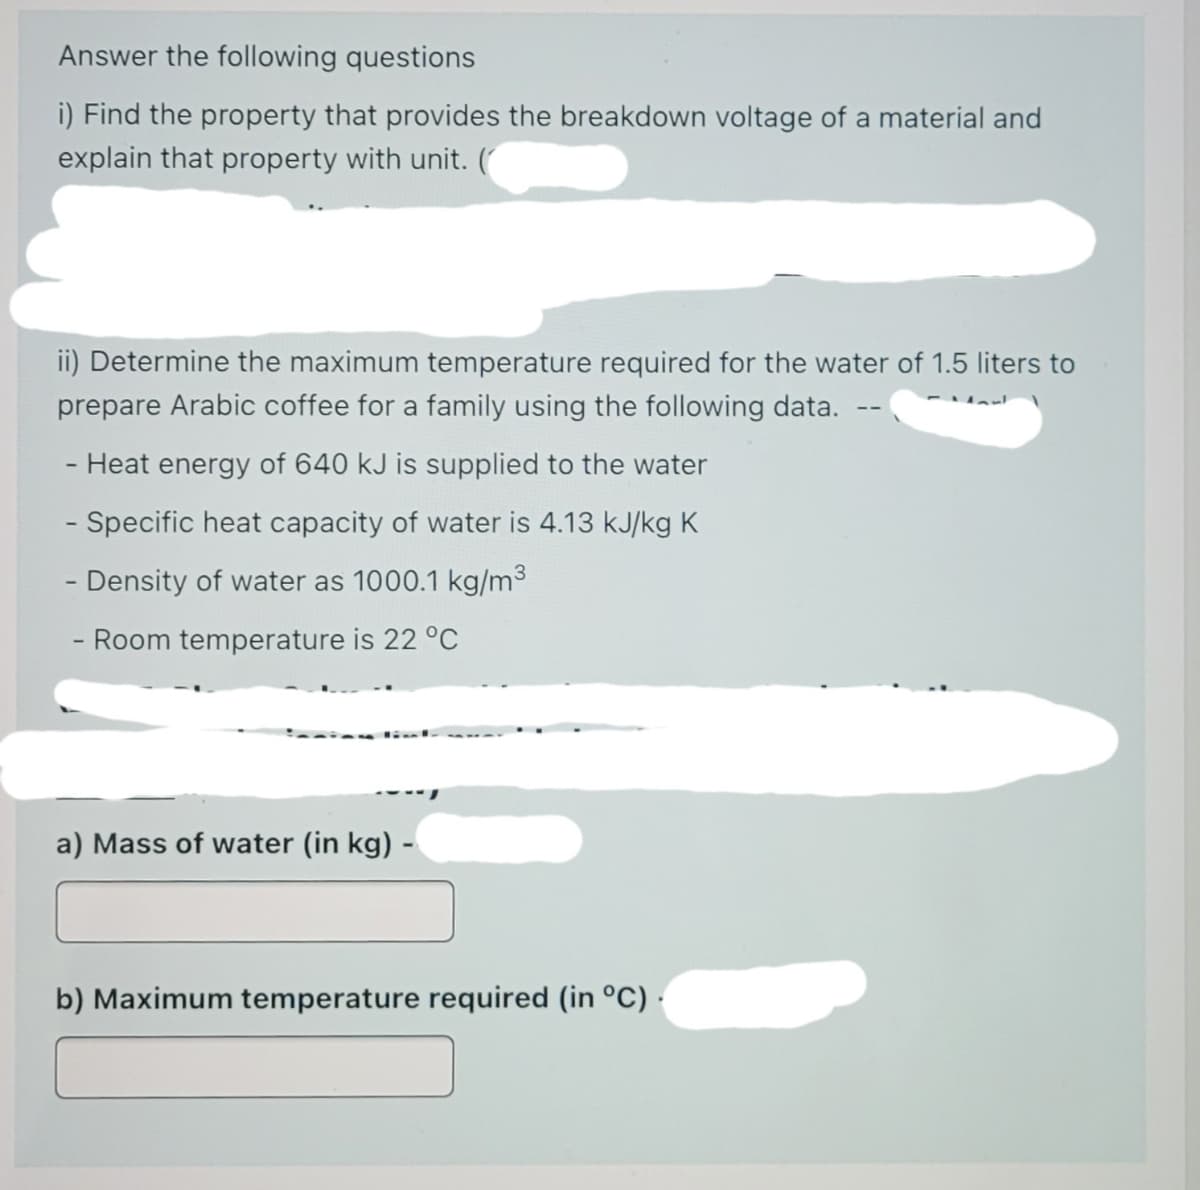 Answer the following questions
i) Find the property that provides the breakdown voltage of a material and
explain that property with unit.
ii) Determine the maximum temperature required for the water of 1.5 liters to
prepare Arabic coffee for a family using the following data.
Heat energy of 640 kJ is supplied to the water
- Specific heat capacity of water is 4.13 kJ/kg K
- Density of water as 1000.1 kg/m3
- Room temperature is 22 °C
a) Mass of water (in kg) -
b) Maximum temperature required (in °C) -
